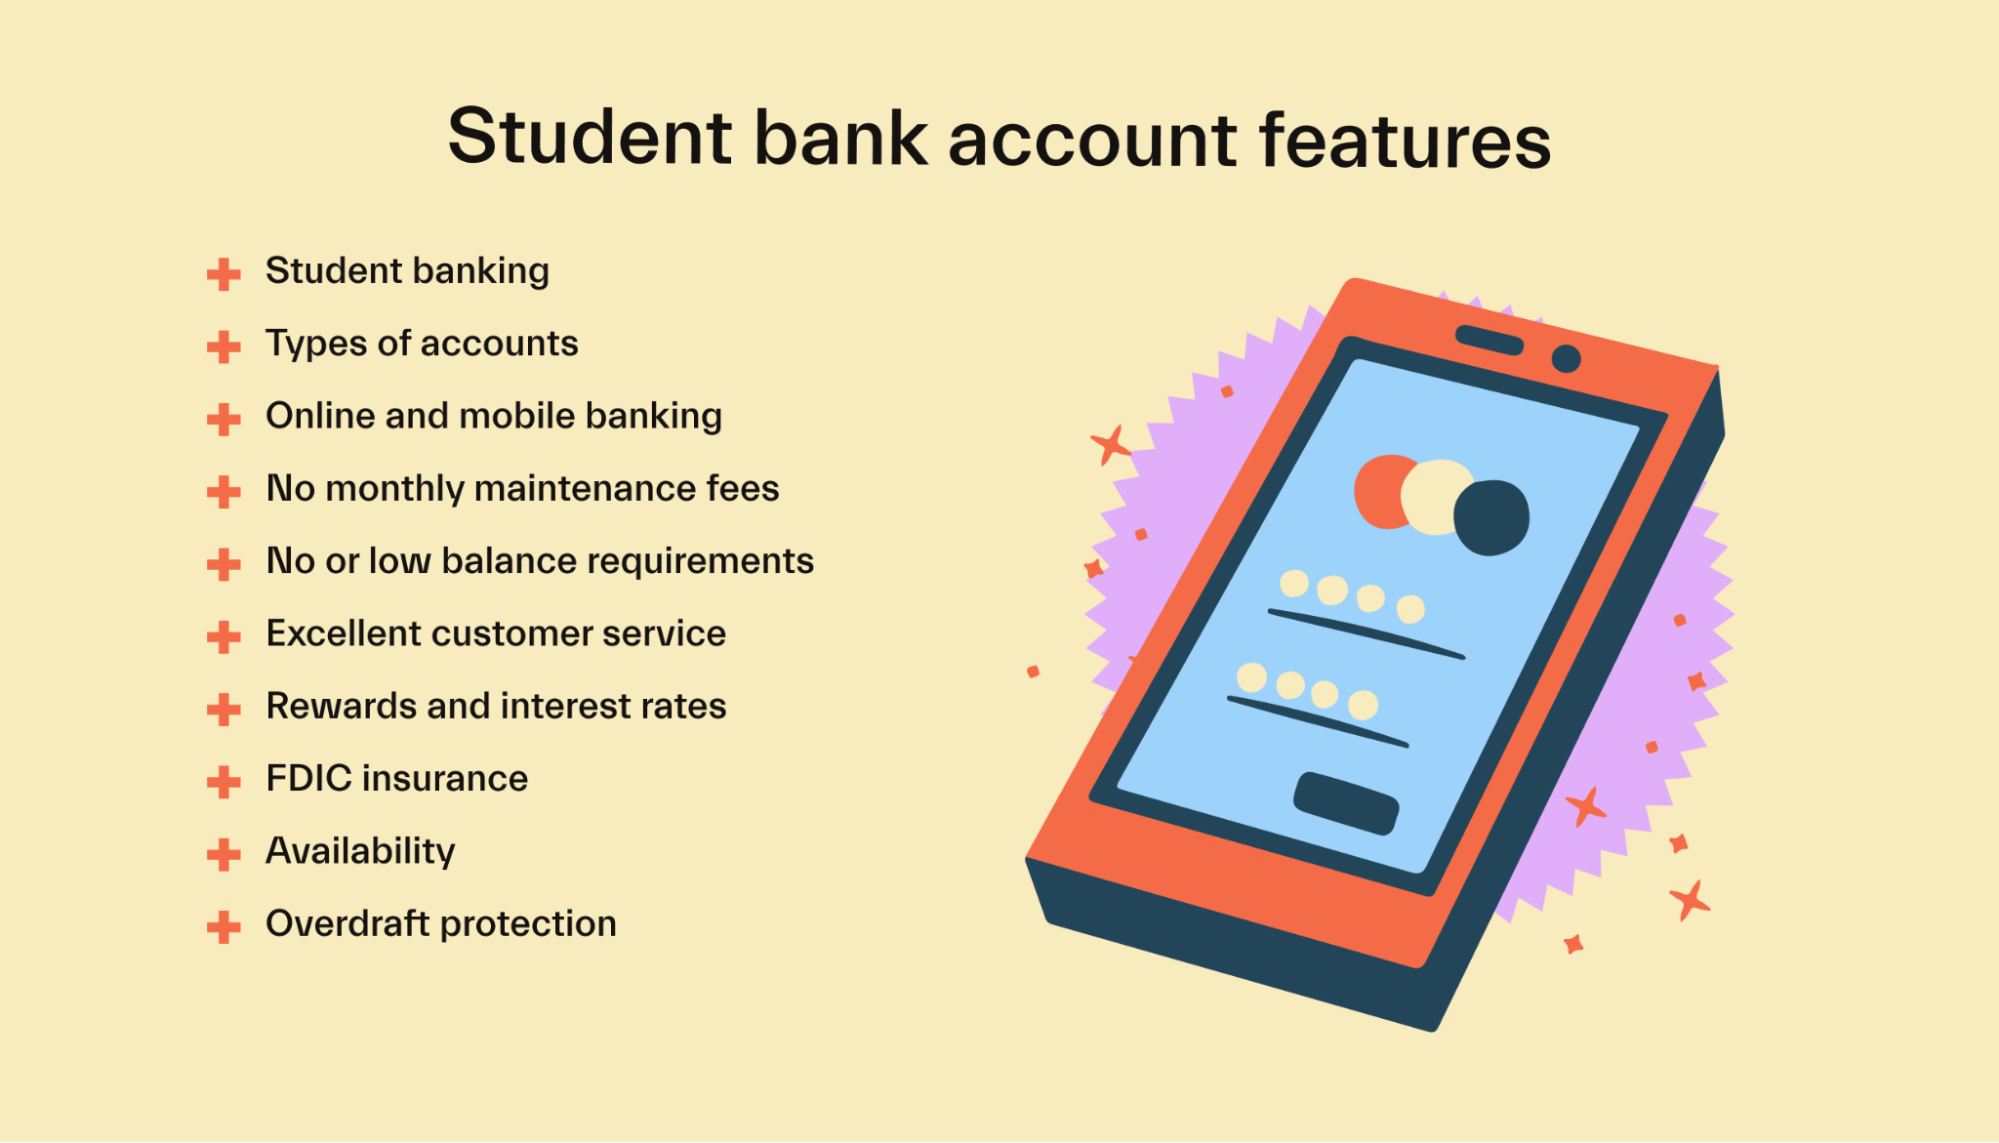 Student bank account features